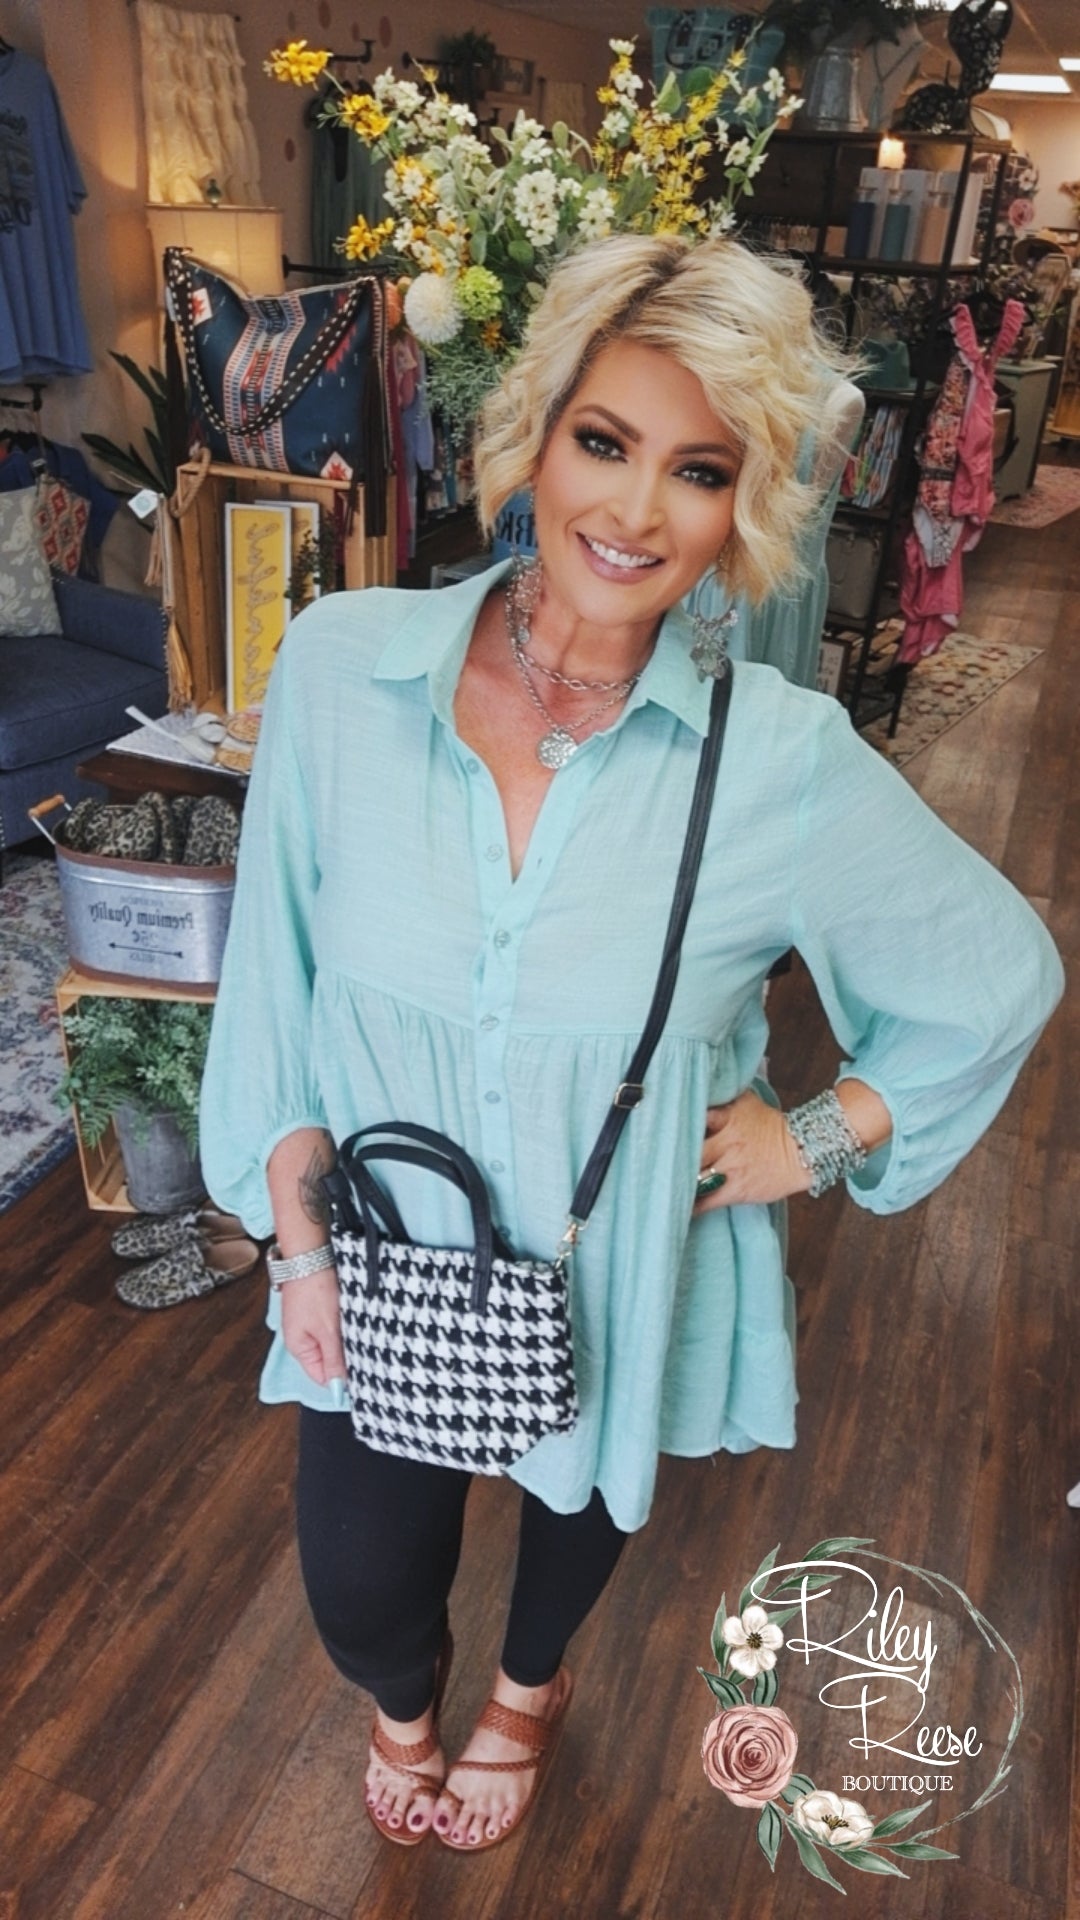 It's a Legacy Houndstooth Crossbody